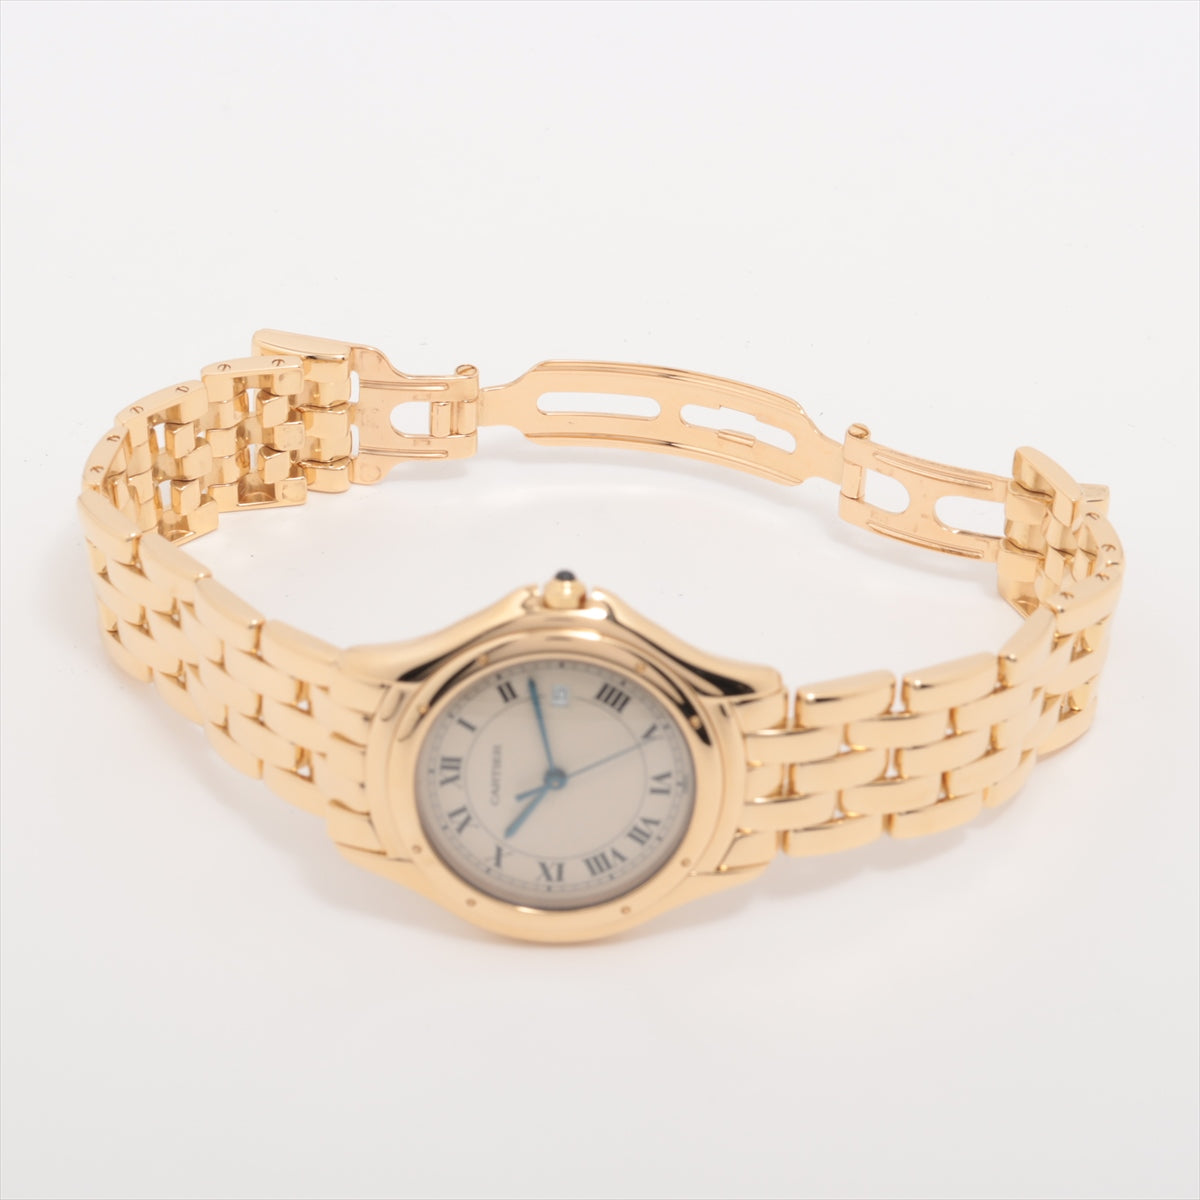 Cartier Cougar classic lm W3500453 YG QZ Ivory-Face Extra Link 1